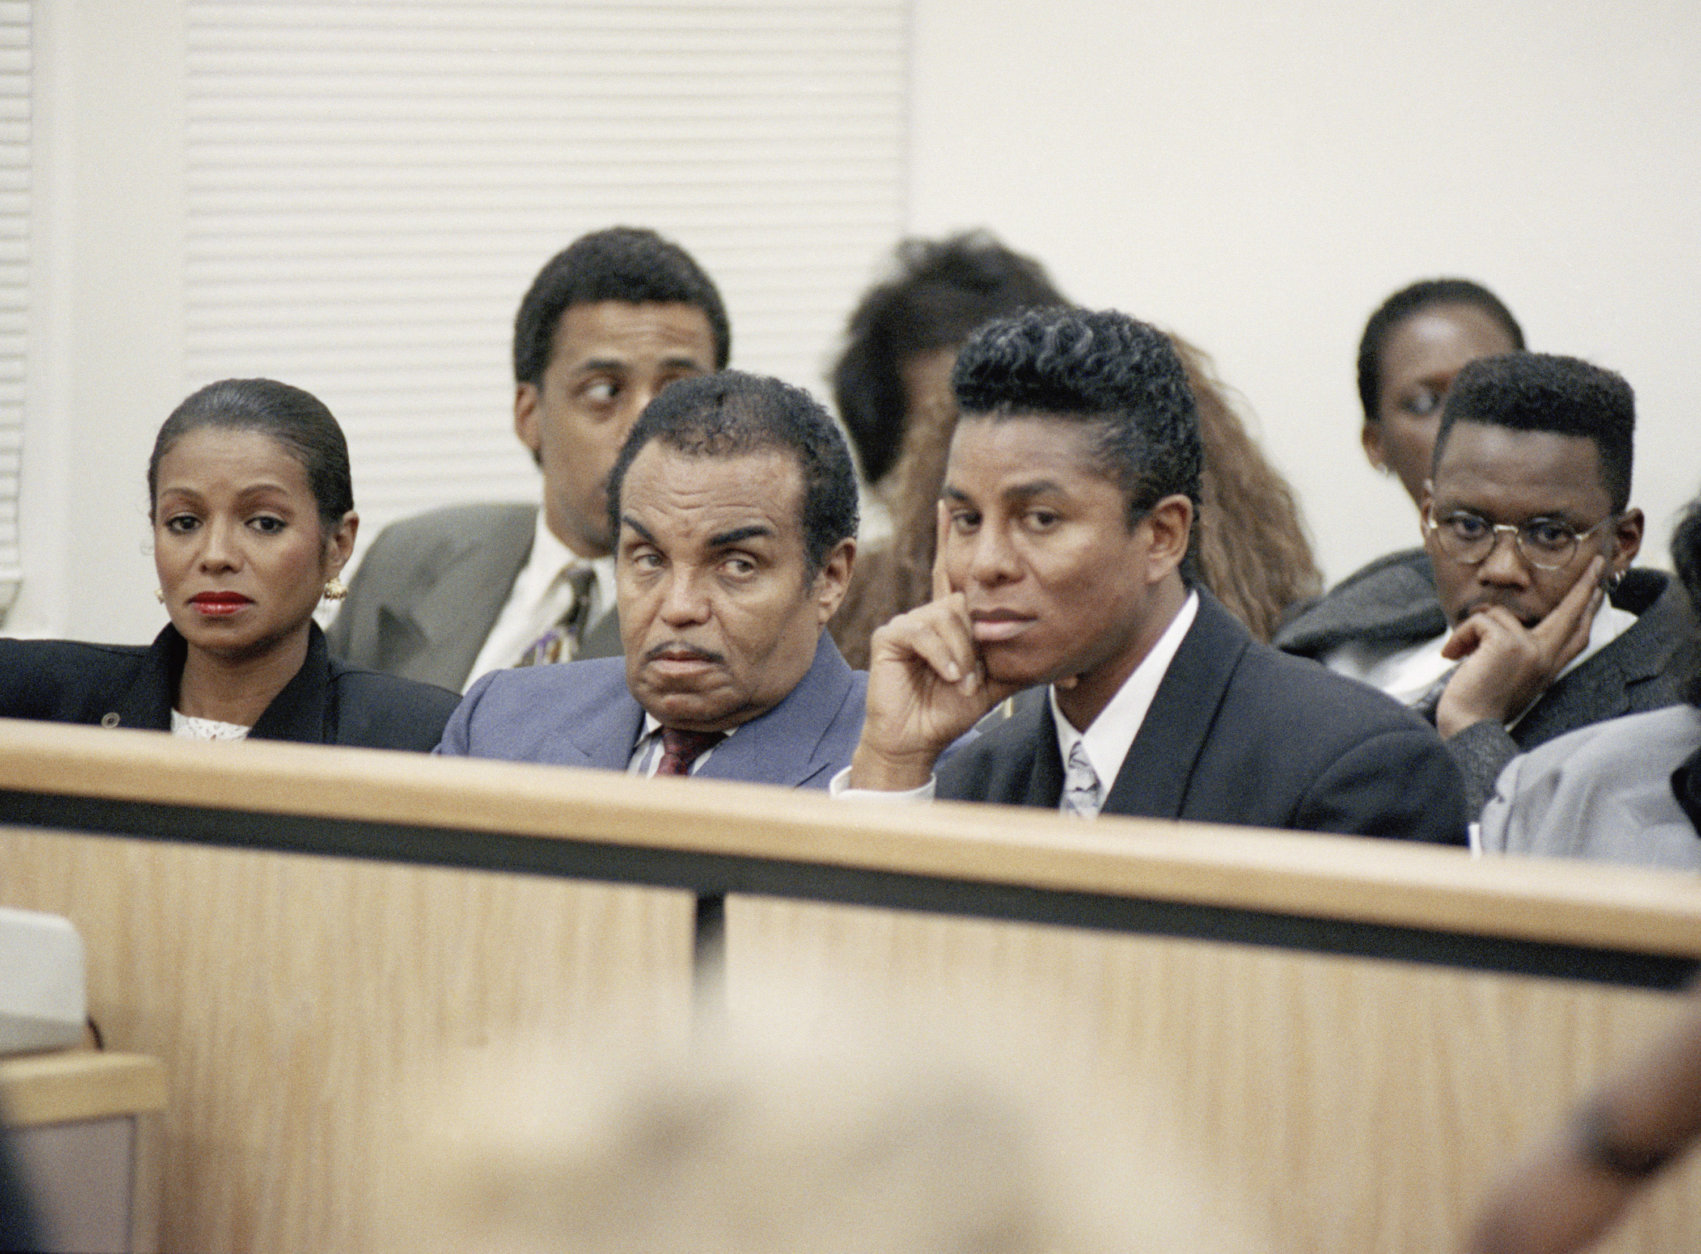 Family patriarch Joseph Jackson, center, and his son, Jermaine, sit in Los Angeles Courtroom Wednesday, Nov. 27 as another son, Randy, is ordered to a hospital lockup on charges he beat his wife over a year long period of brutality. Randy, also the brother of pop superstar Michael Jackson, will being domestic violence counseling while in the hospital. (AP Photo/ Nick Ut)